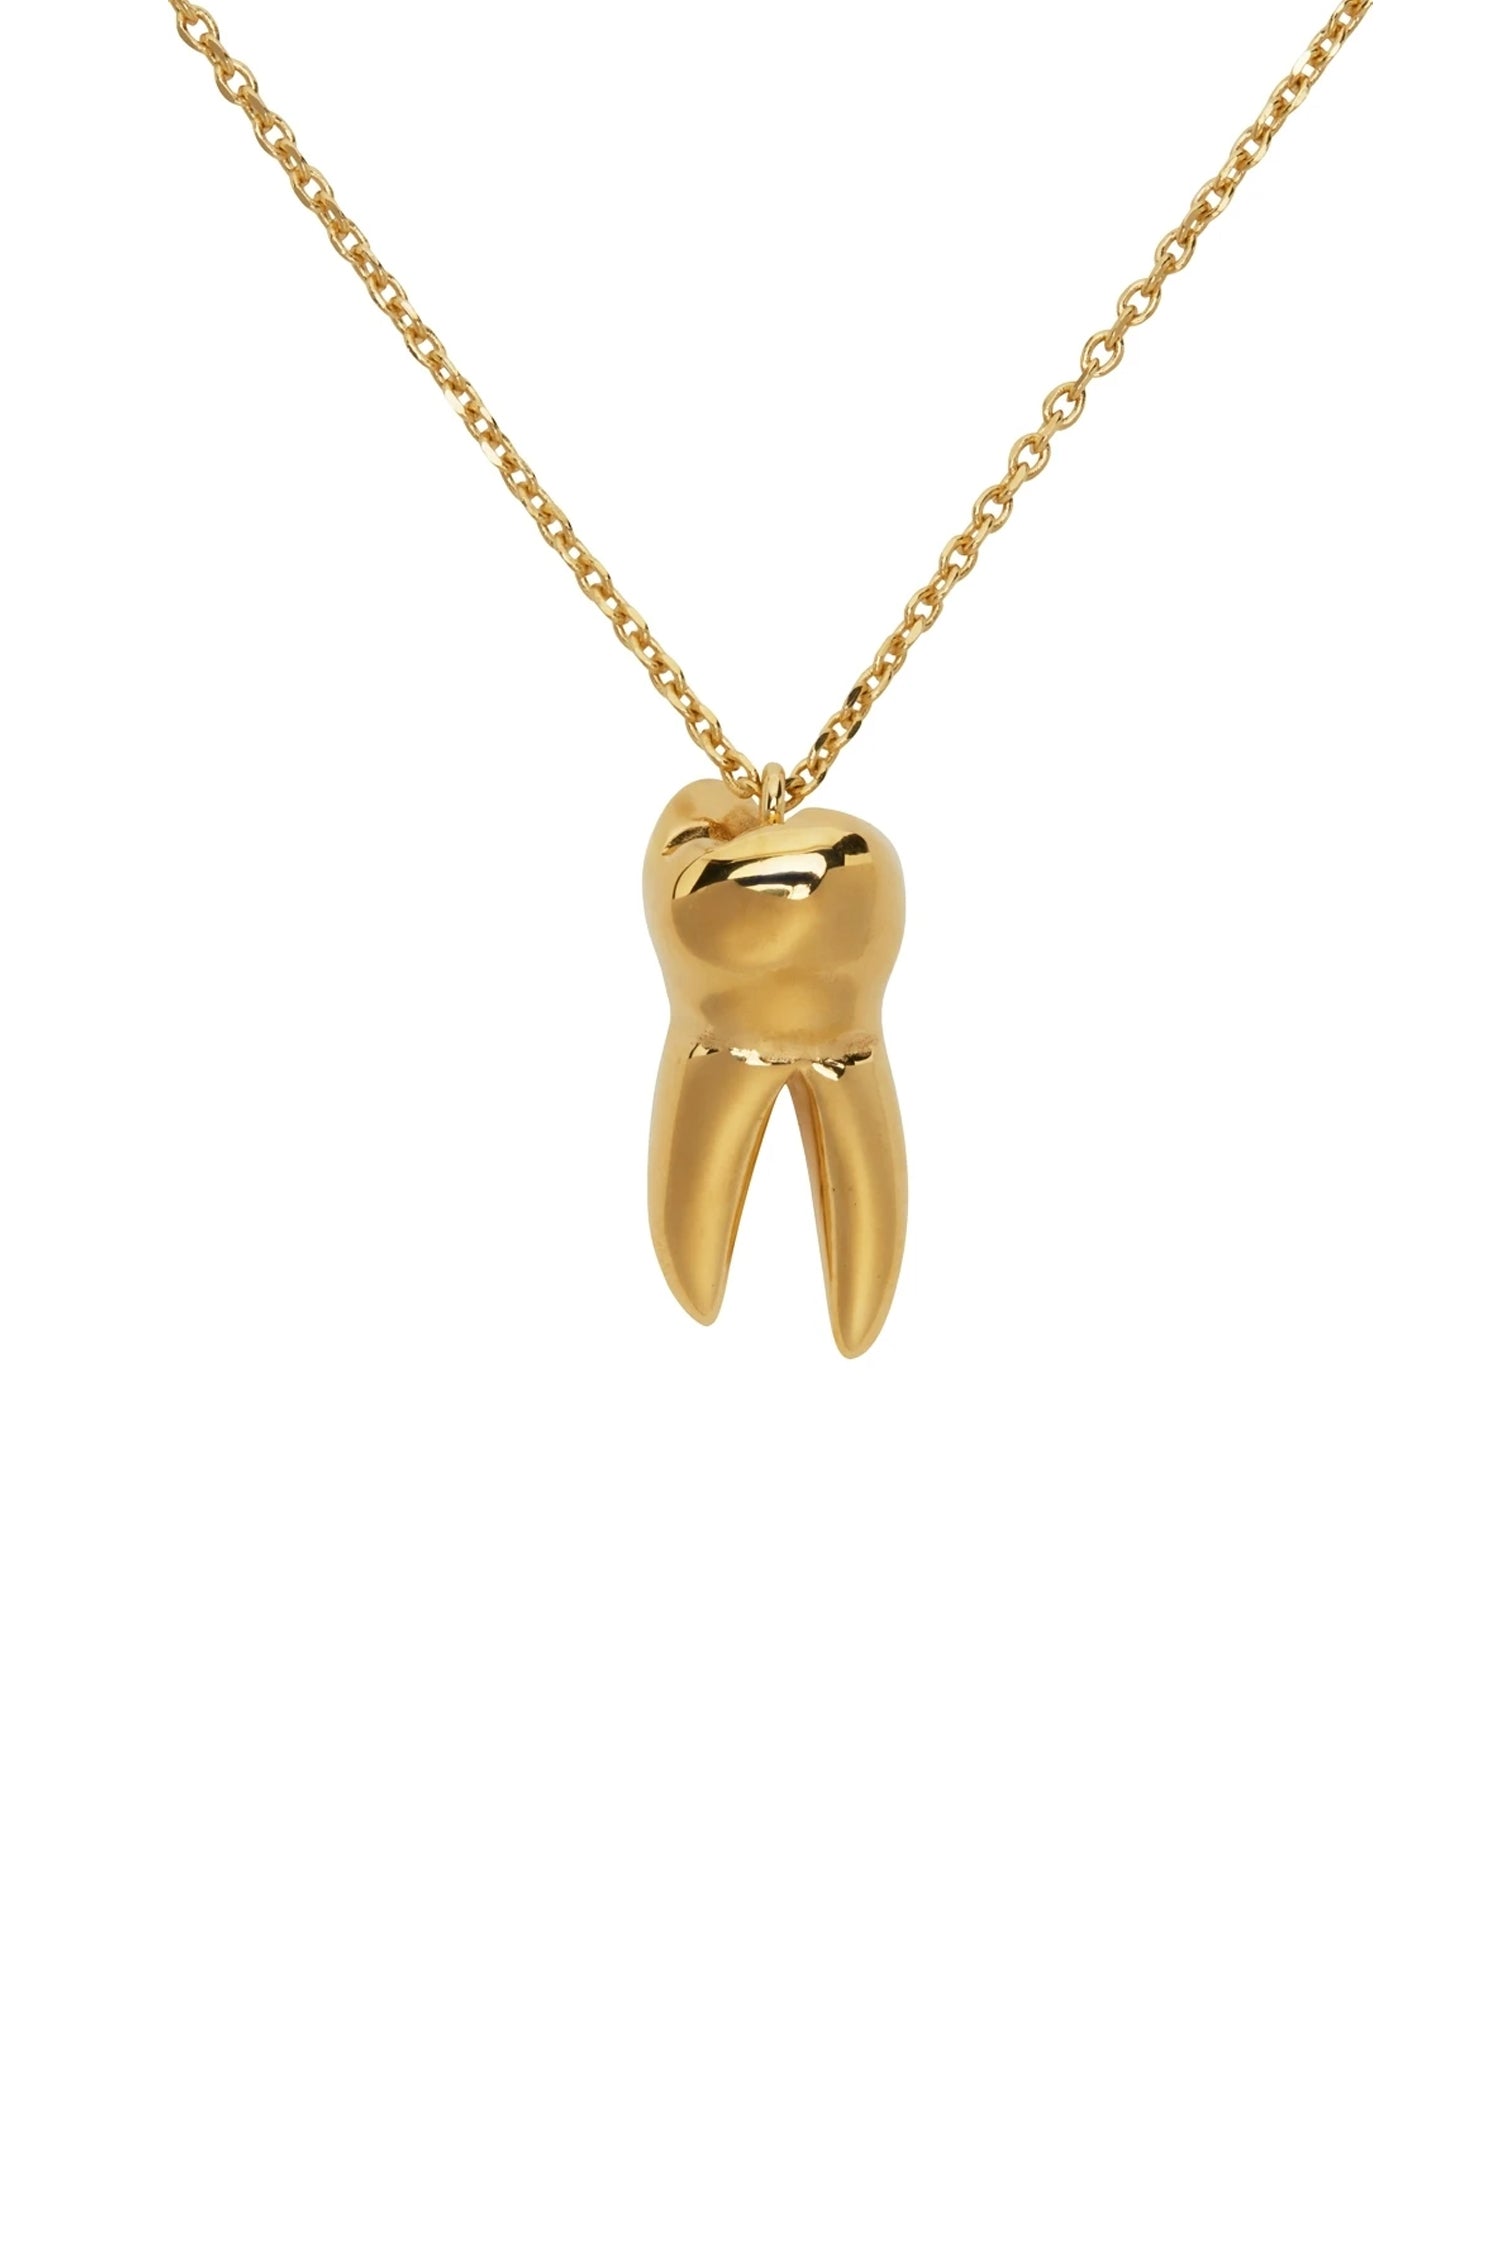 SINGLE GOLD TOOTH NECKLACE, S22